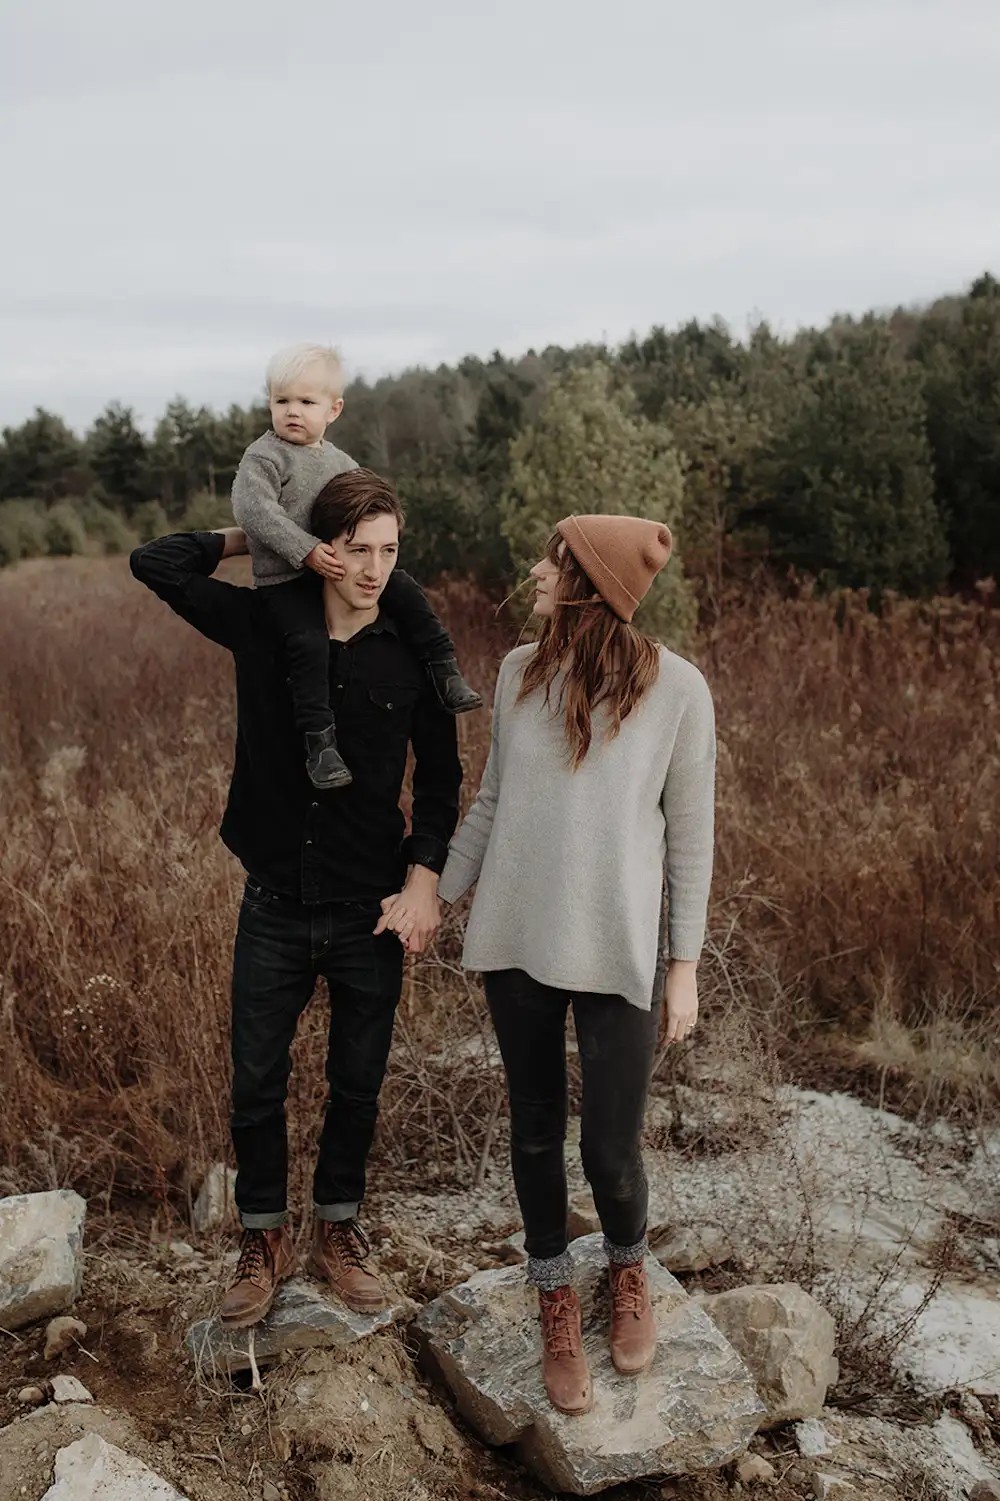 10 Stunning Outdoor Fall Family Photo Outfits to Make Your Photoshoots Unforgettable